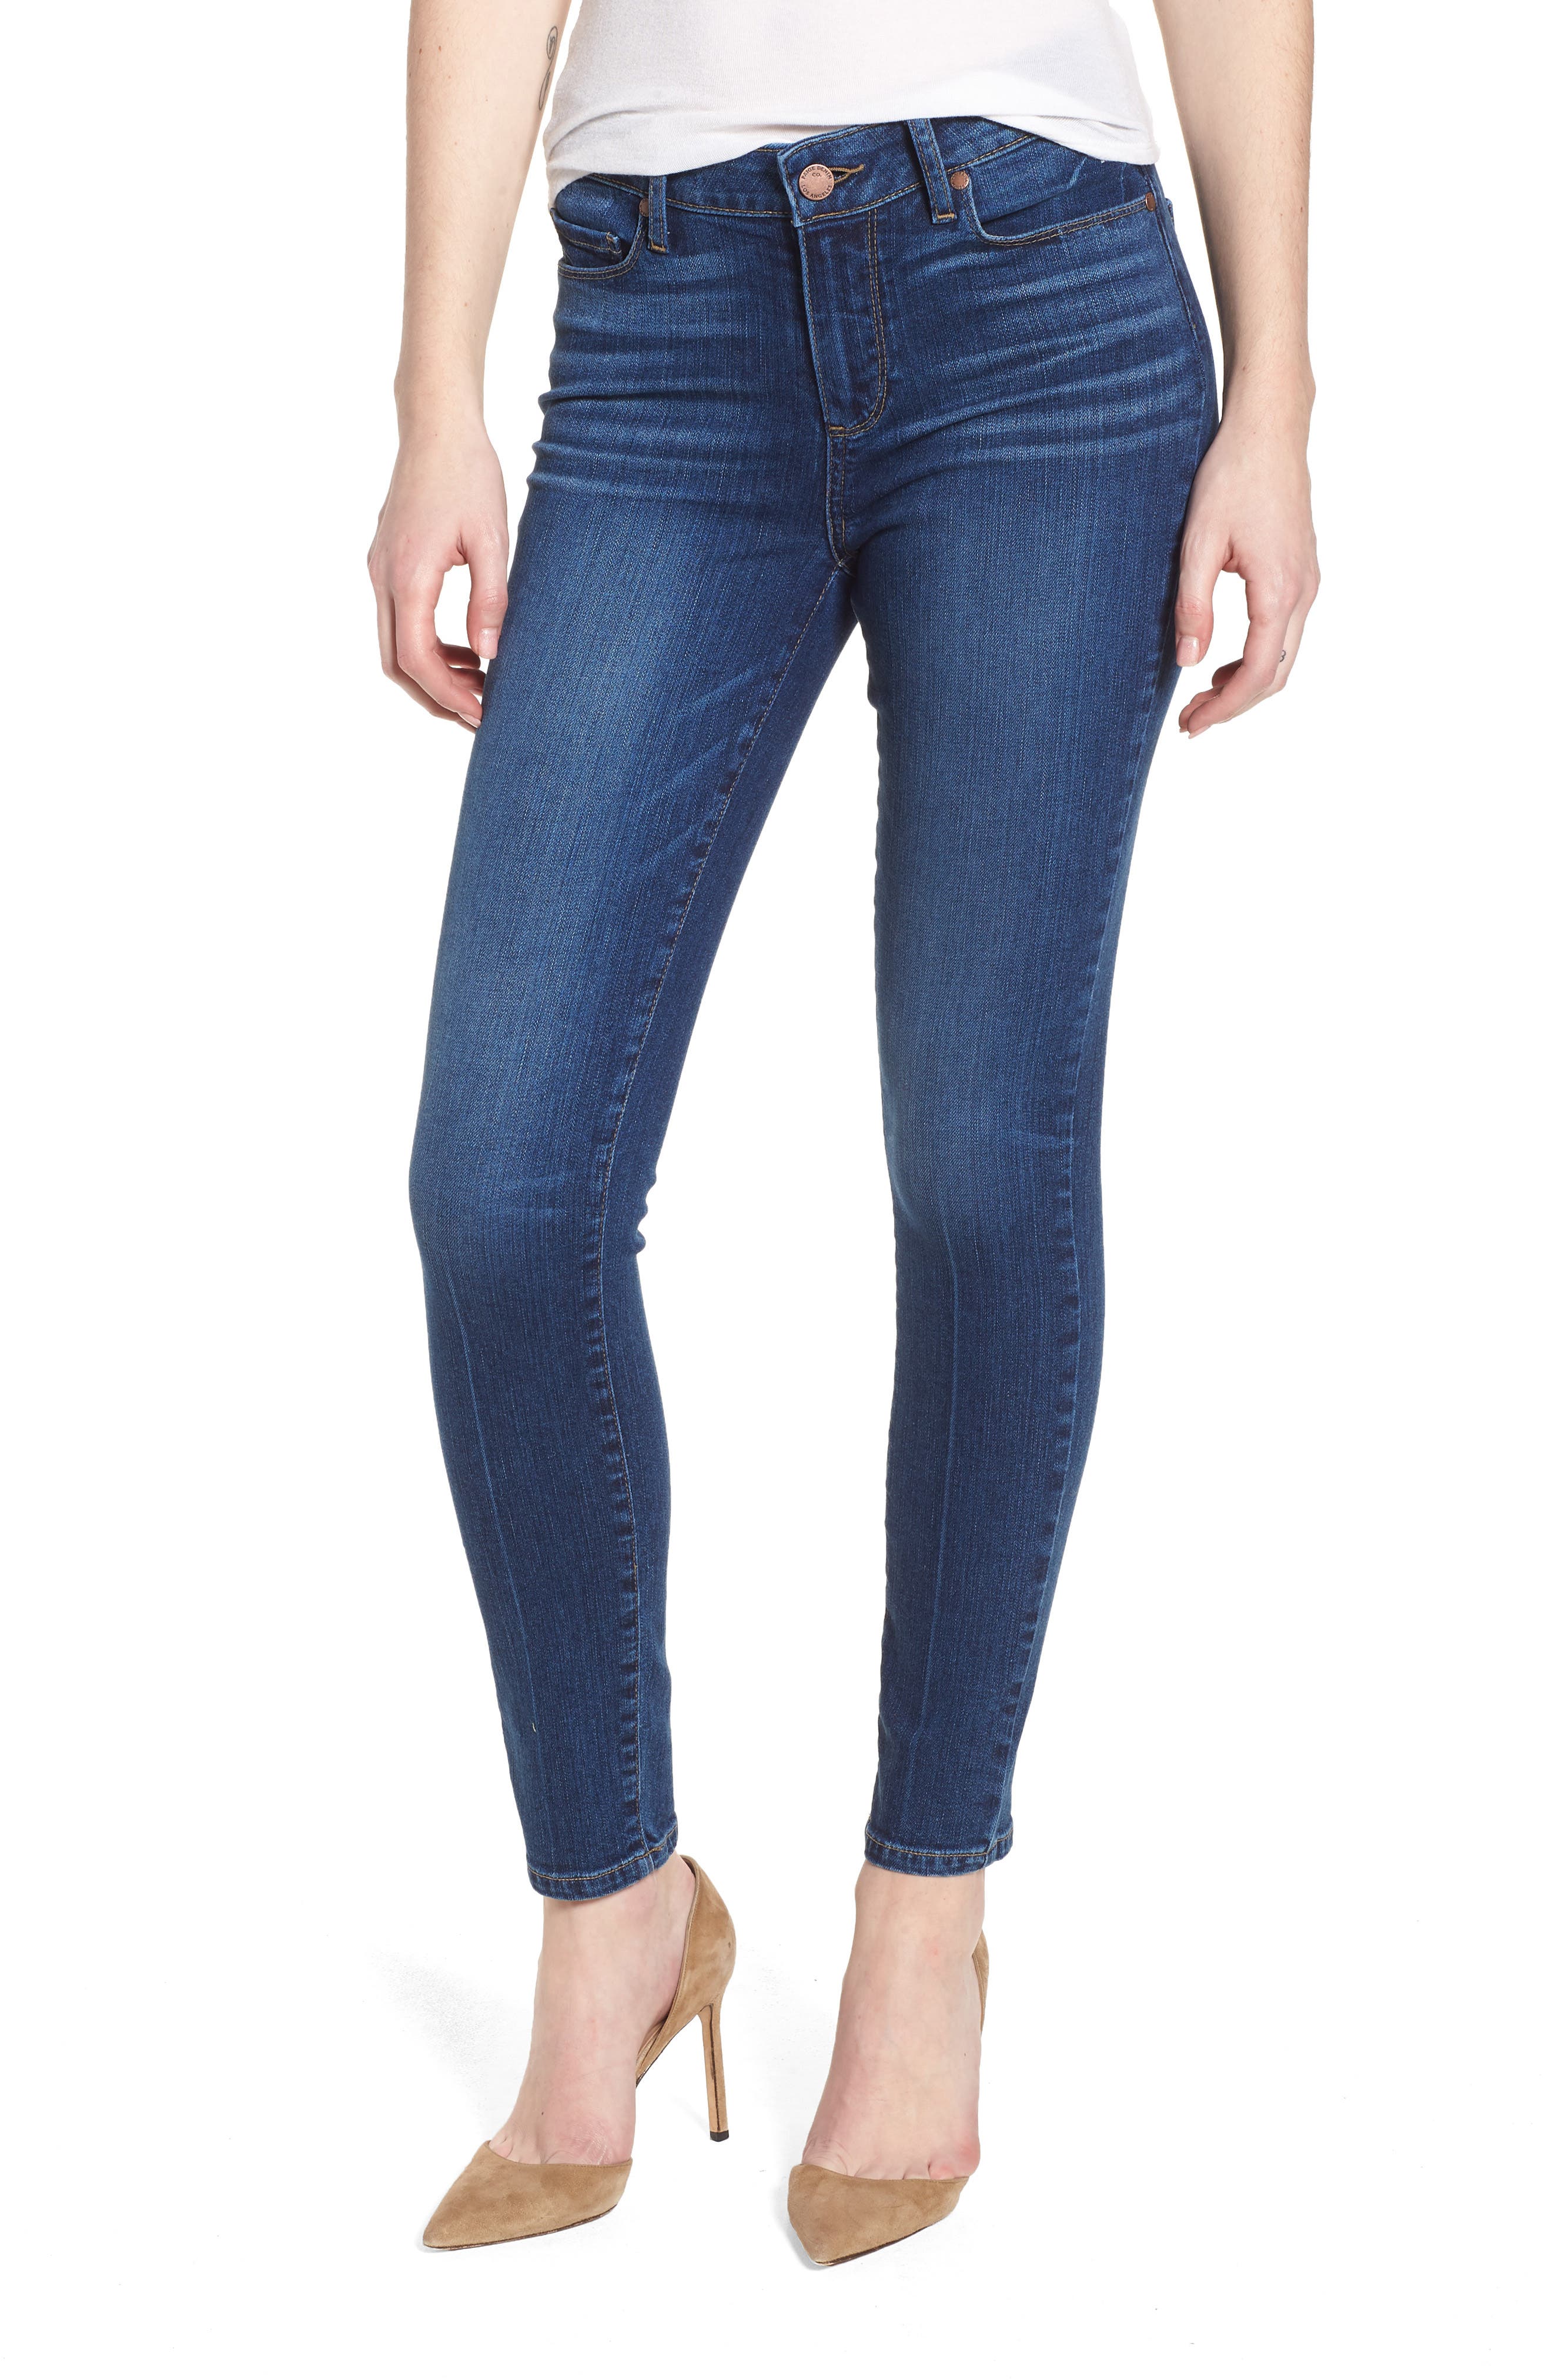 levis jeans 559 relaxed straight